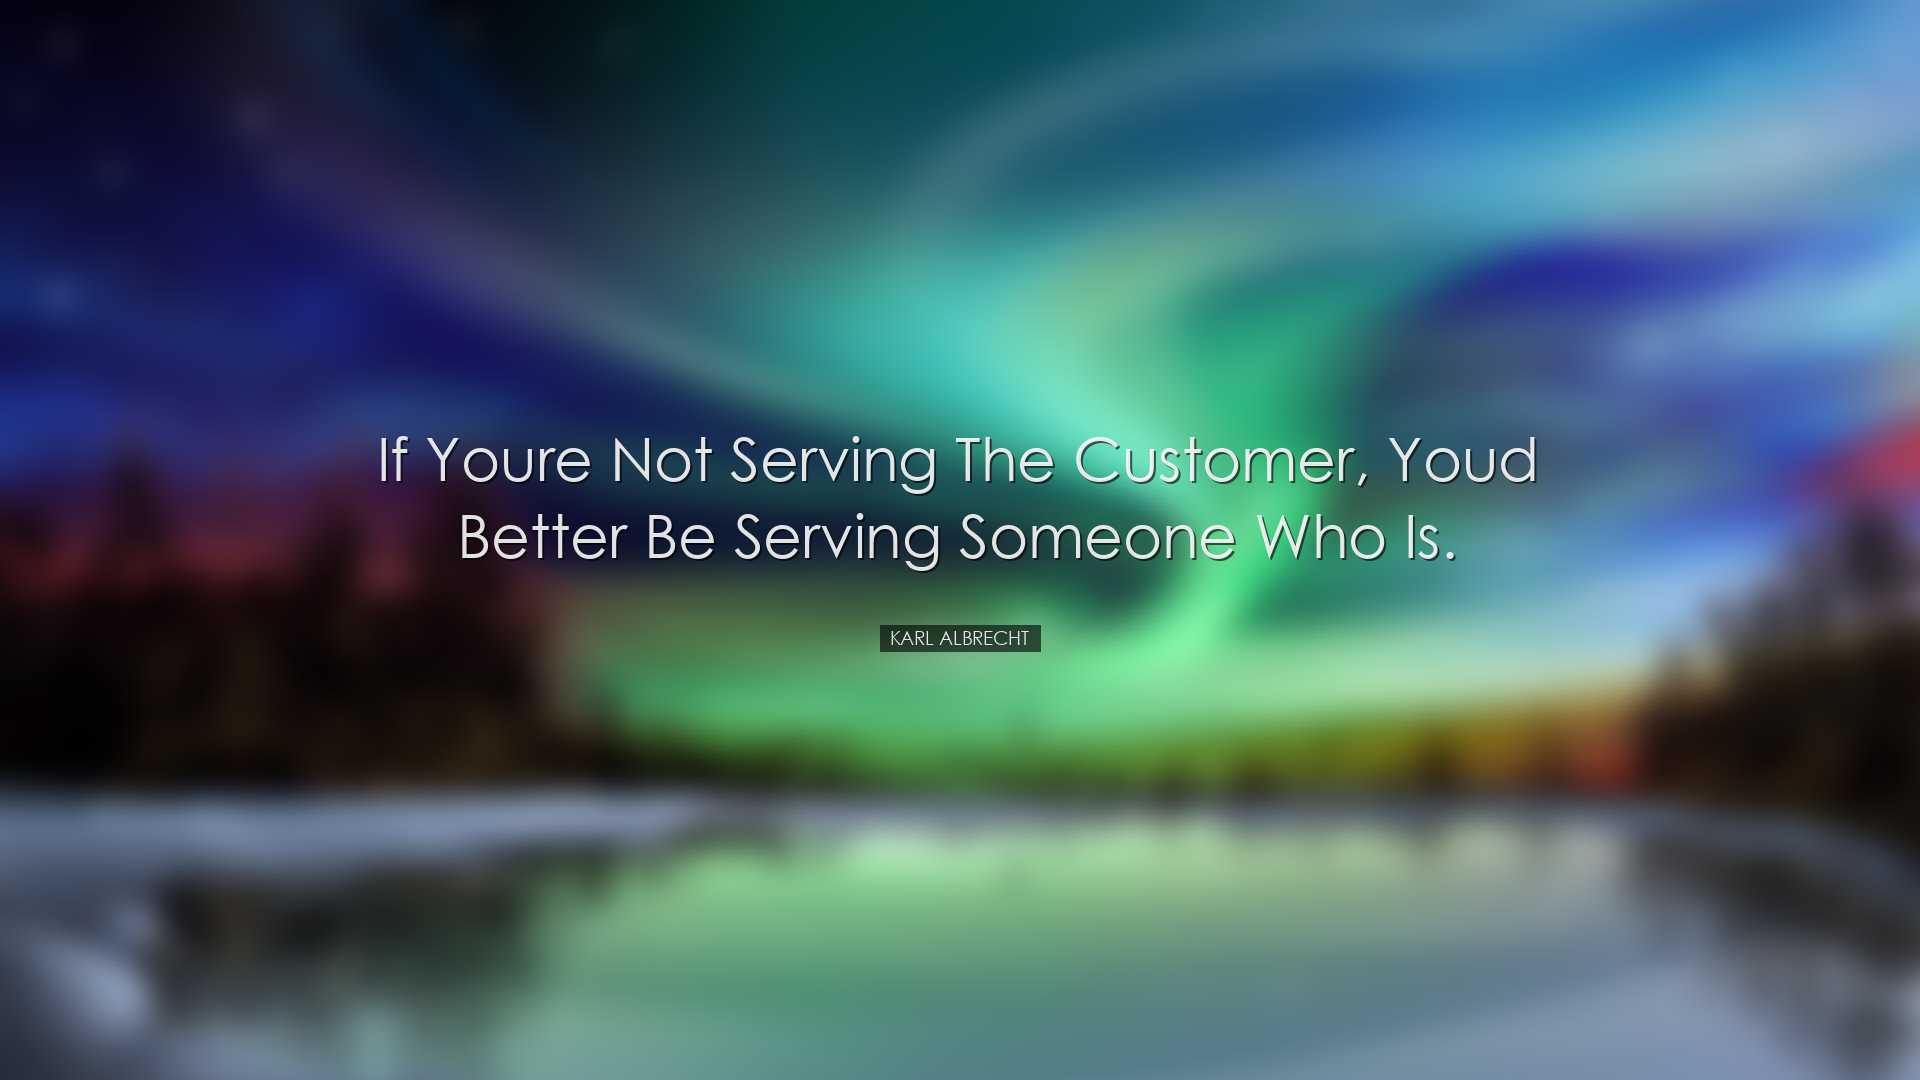 If youre not serving the customer, youd better be serving someone